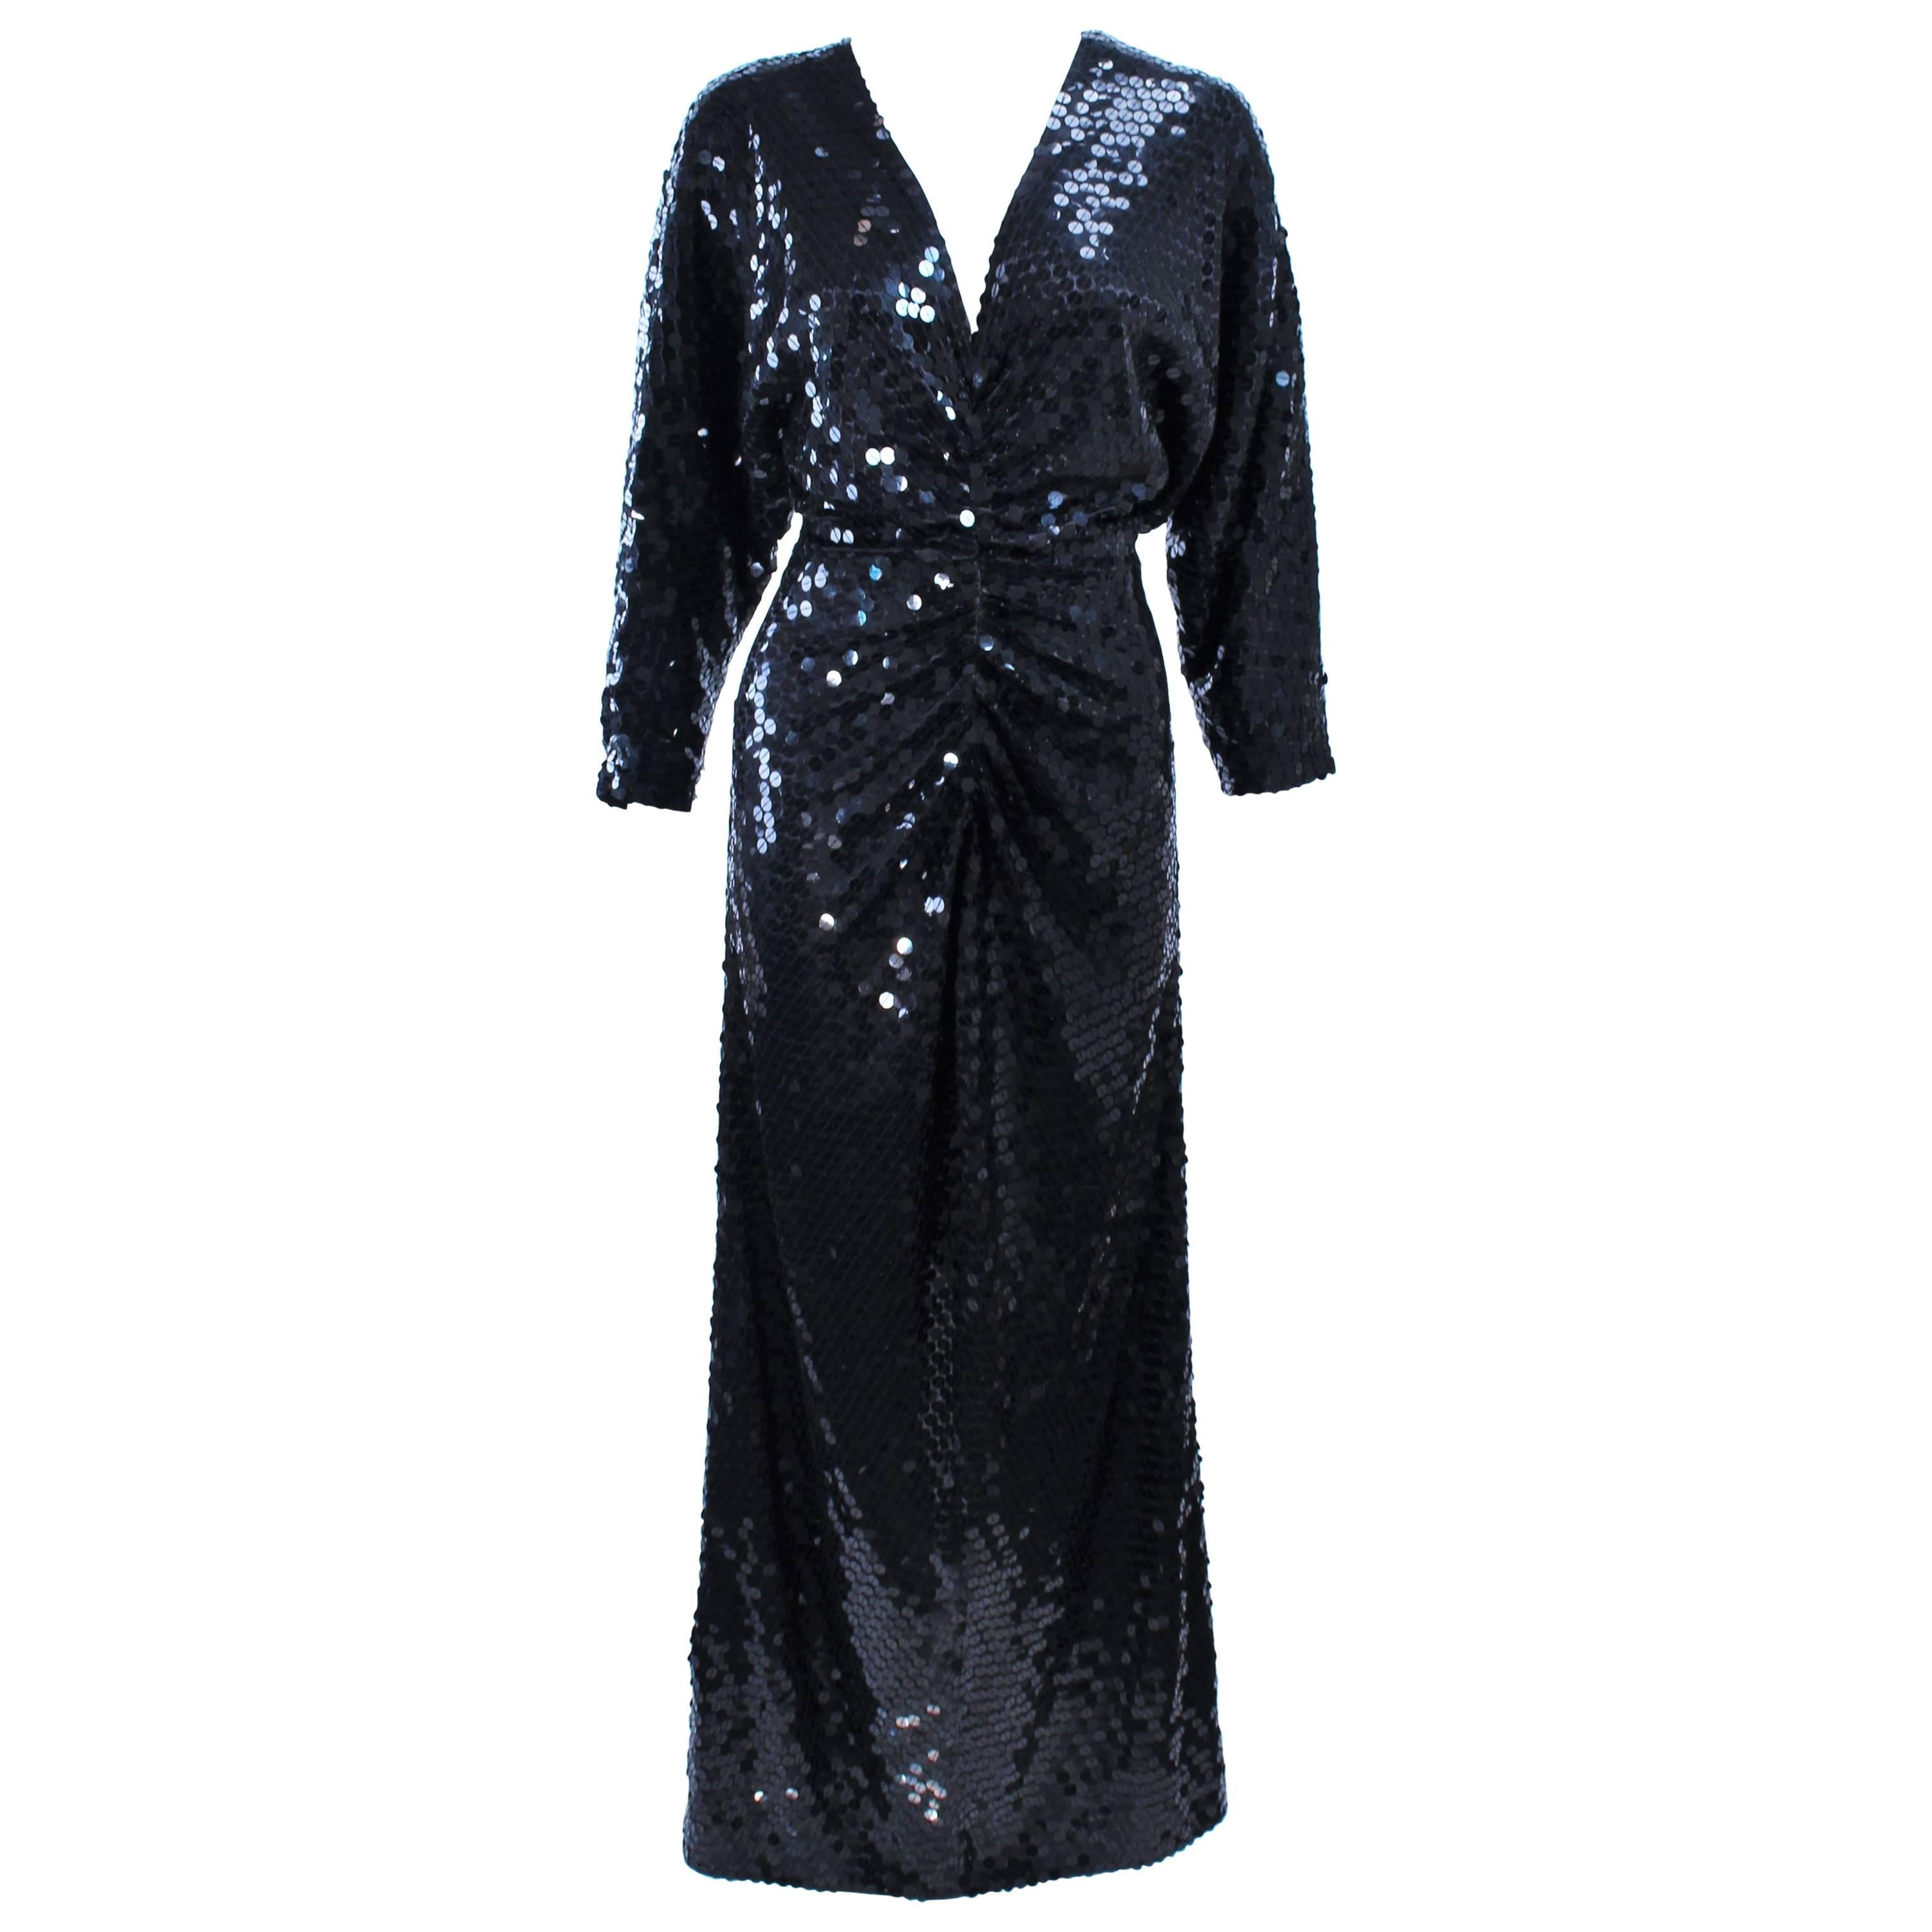 OLEG CASSINI Black Sequin Draped Gown with Dolman Sleeve Size 10 For Sale